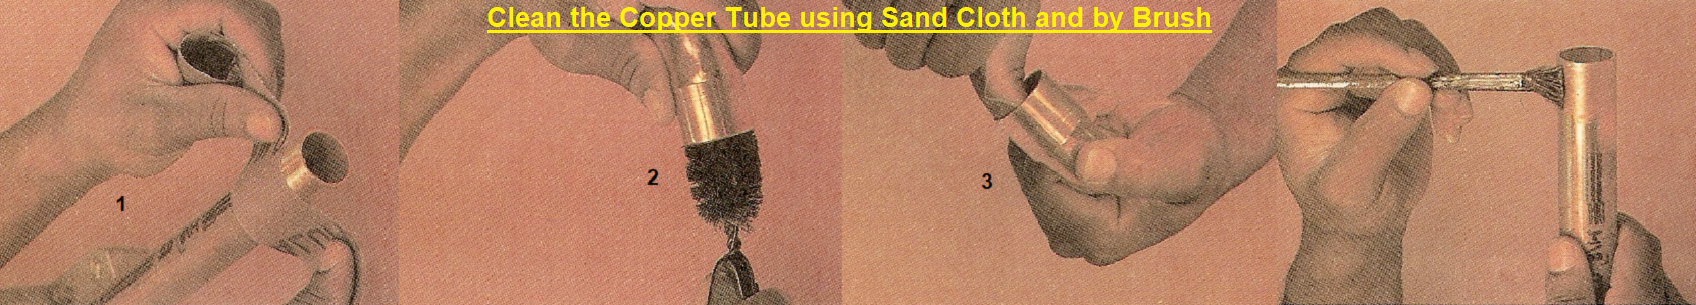 Clean the copper tube by sand cloth and by brush